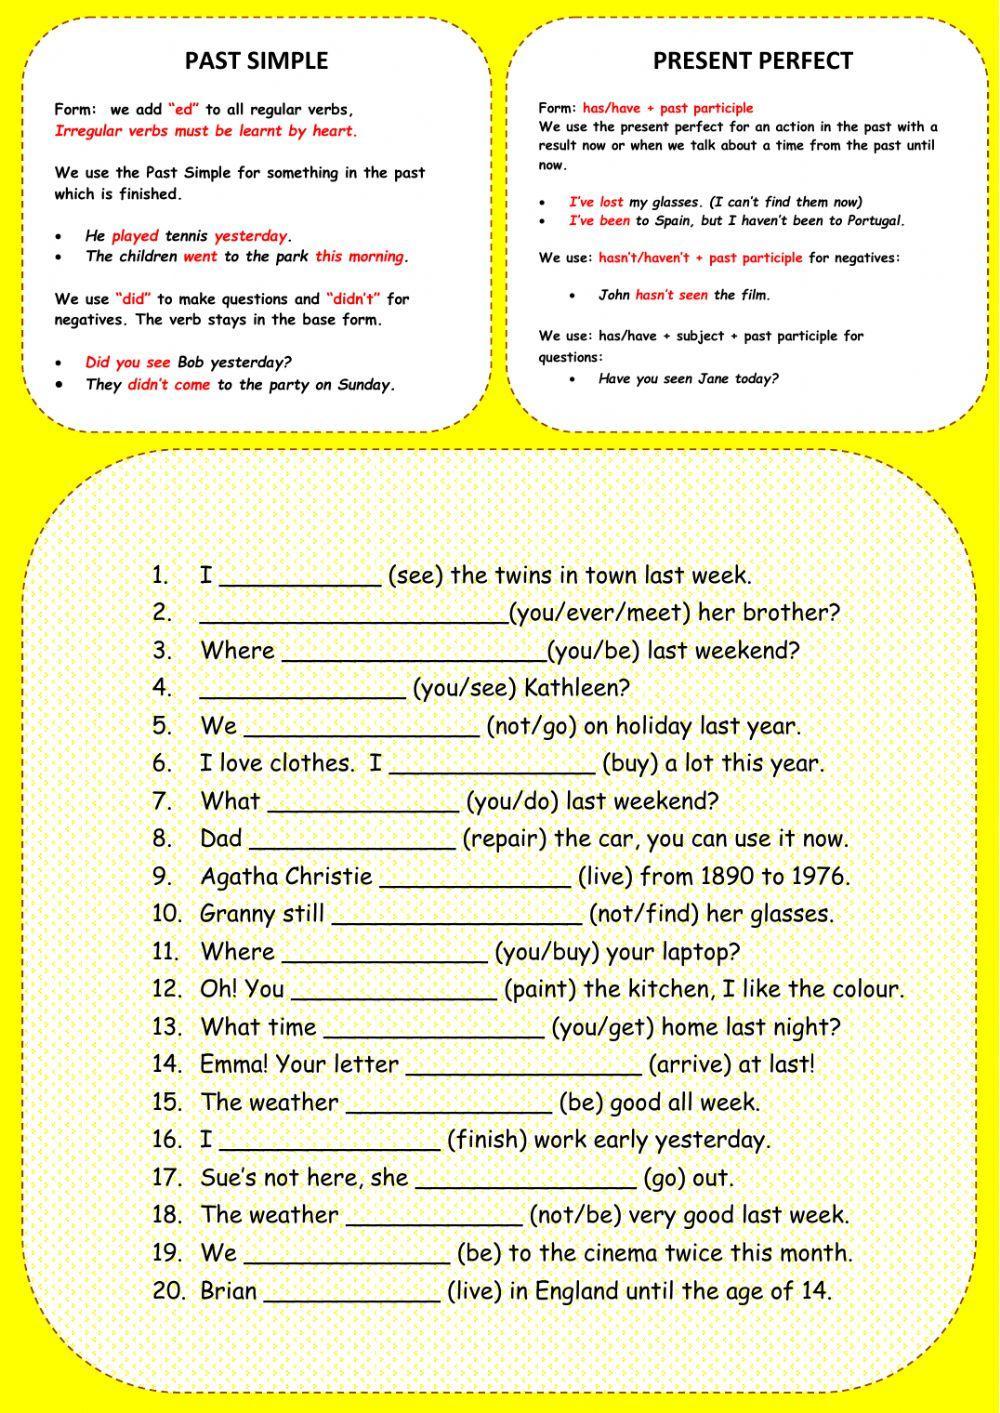 Present perfect simple v Past simple tenses